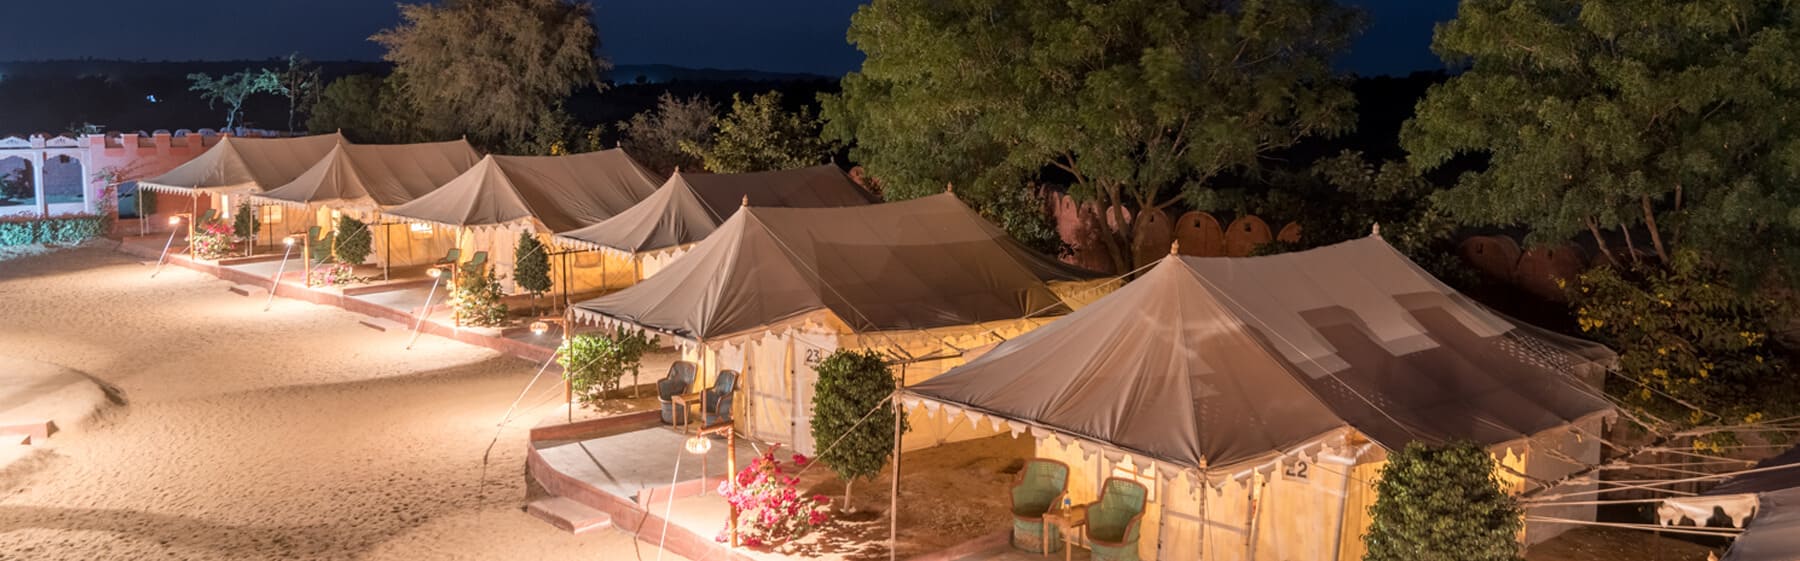 Spend a night in the beautiful luxury 
tents in the middle of the desert in Jodhpur.